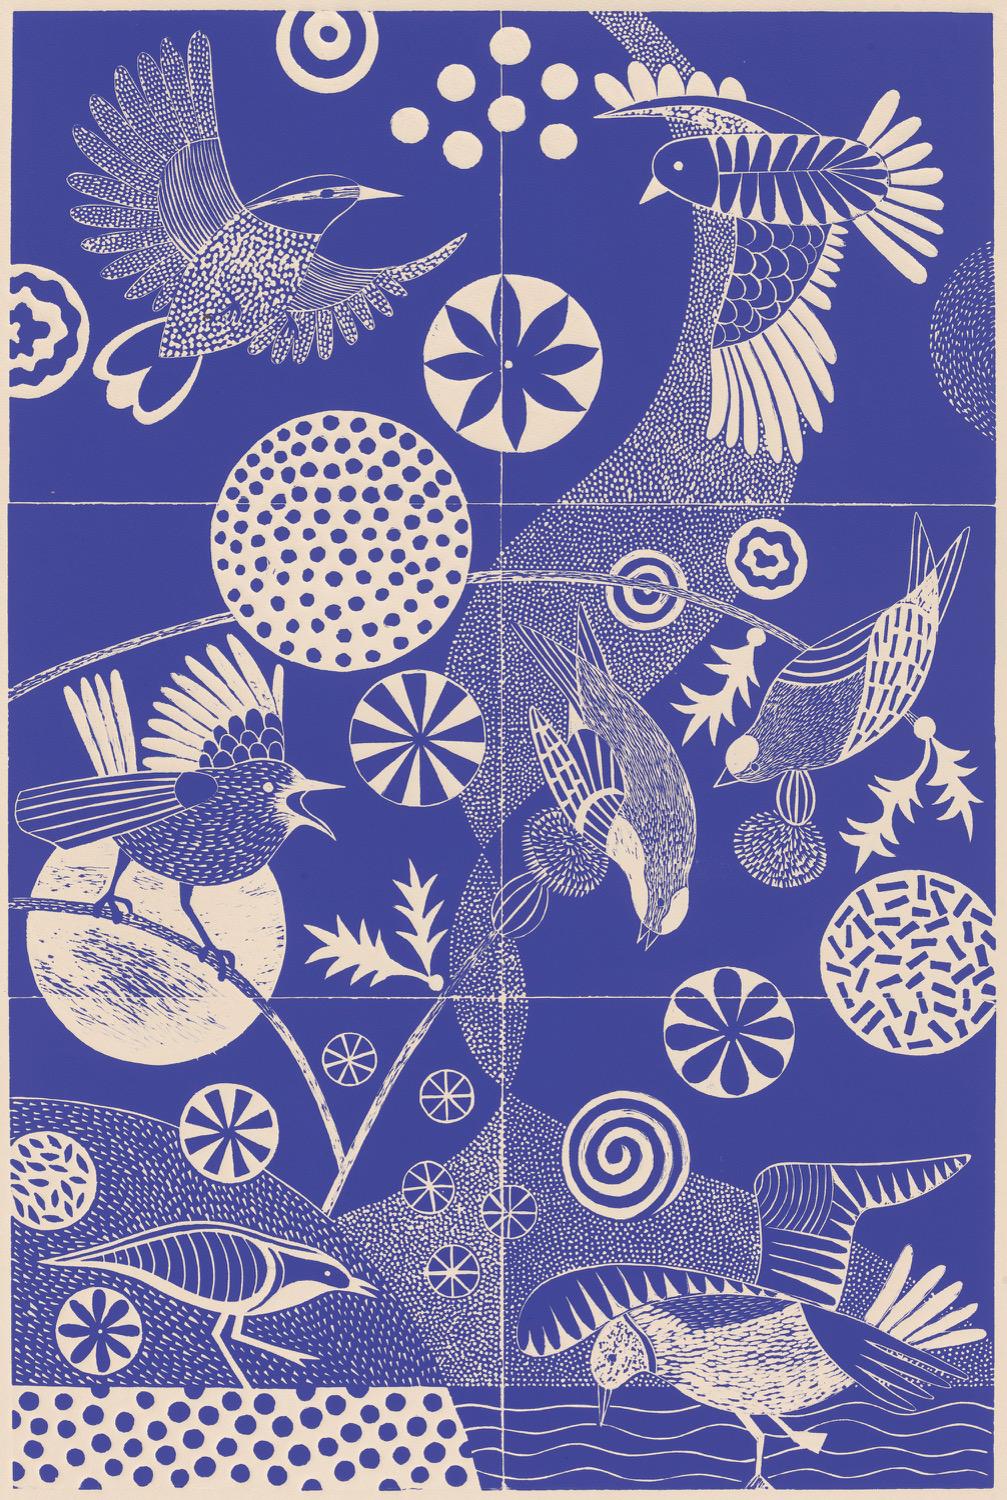 Lisa Houck Figurative Print - 'Chittering and Chattering'  Folk-like linoleum print of birds in blue and white